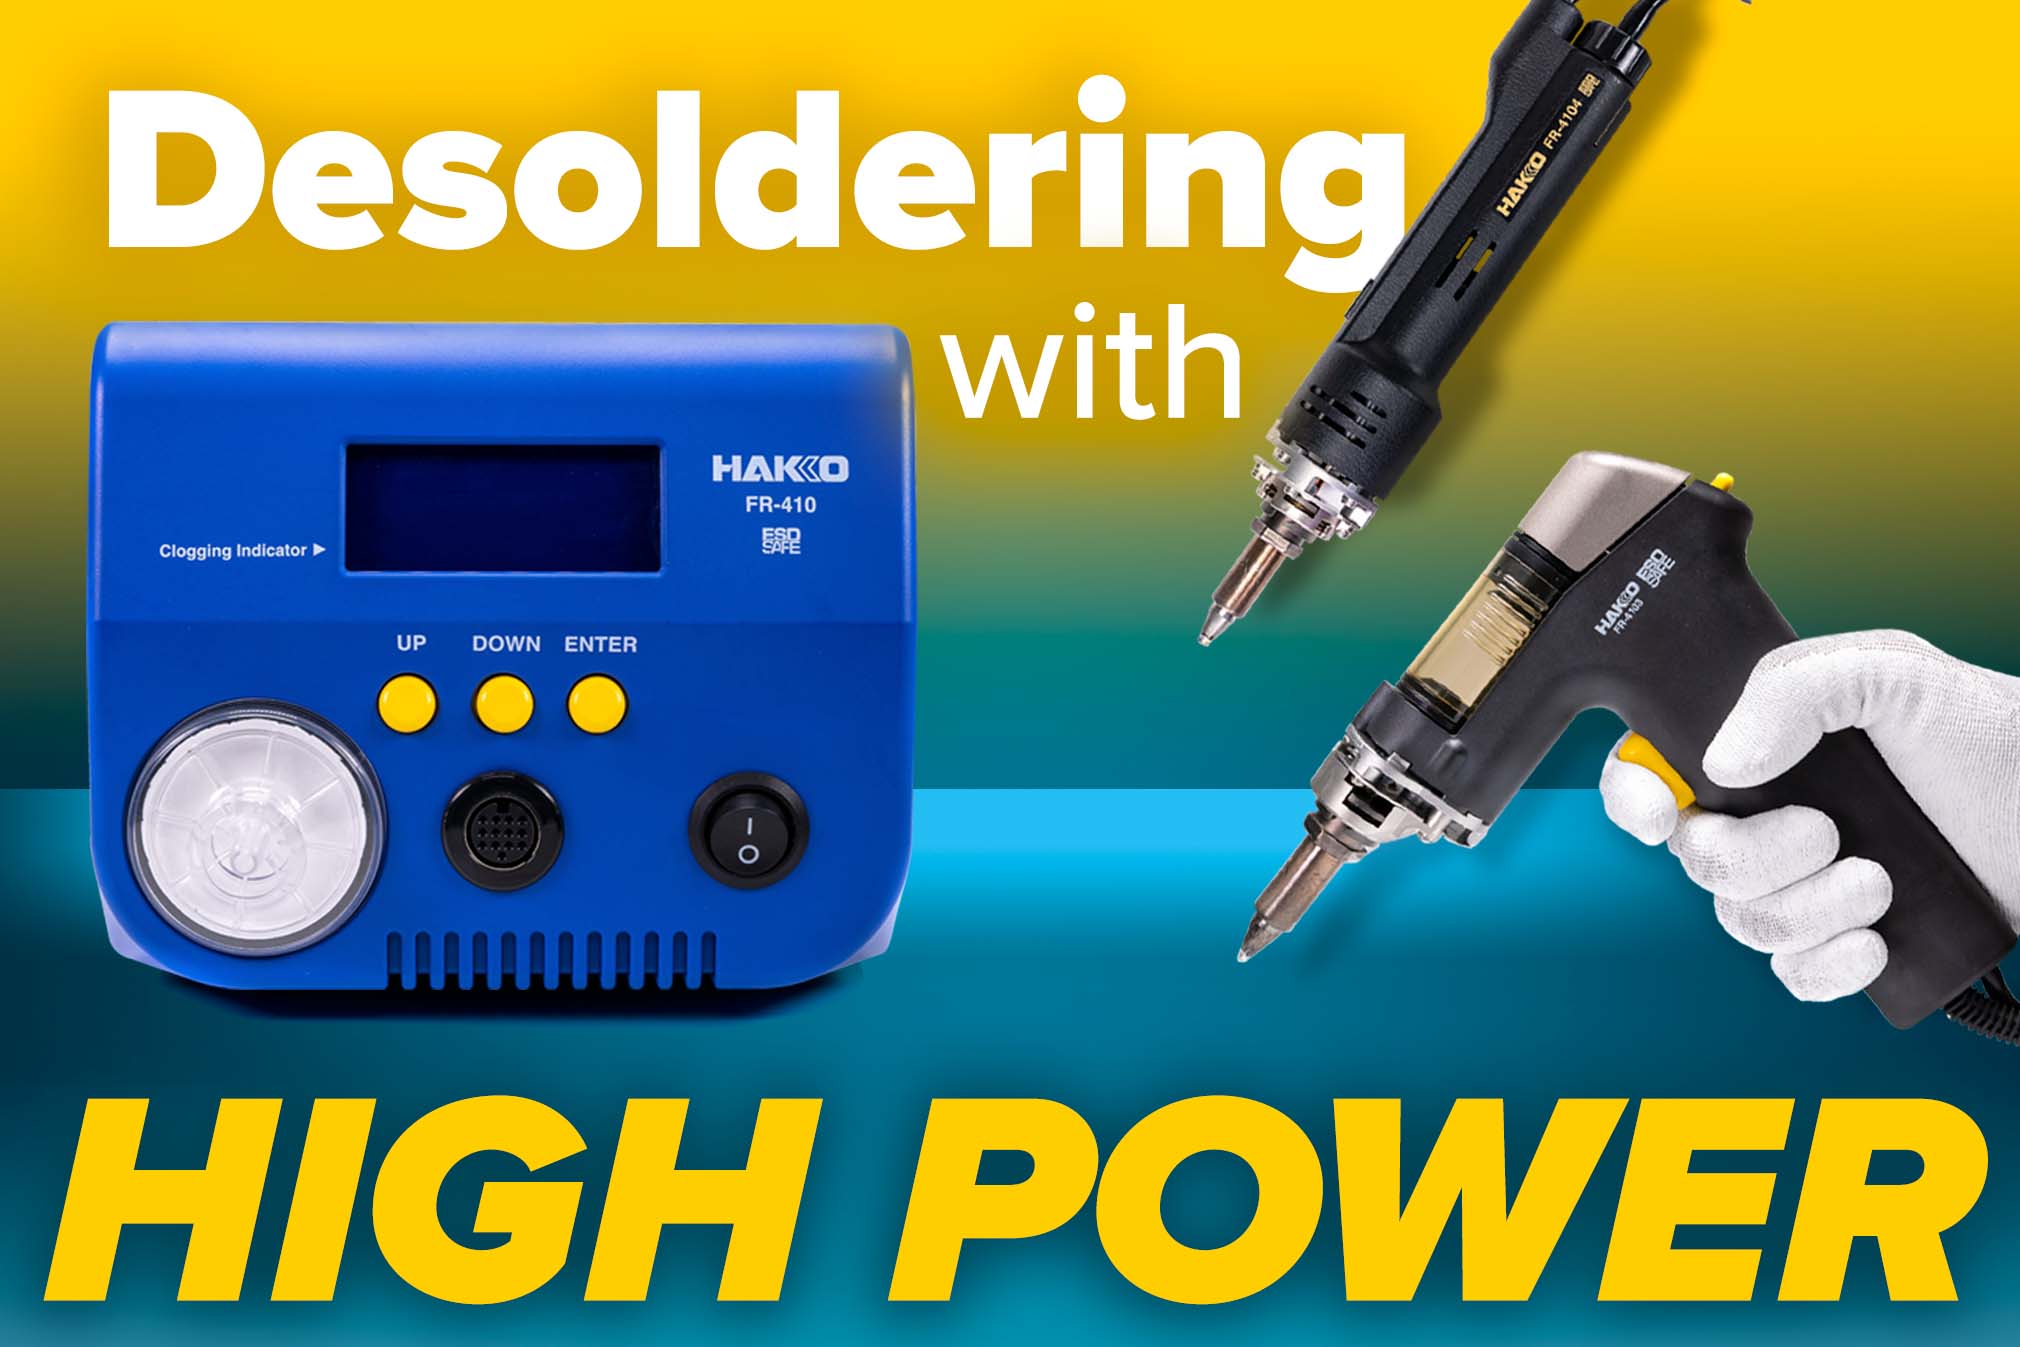 Desoldering with High Power